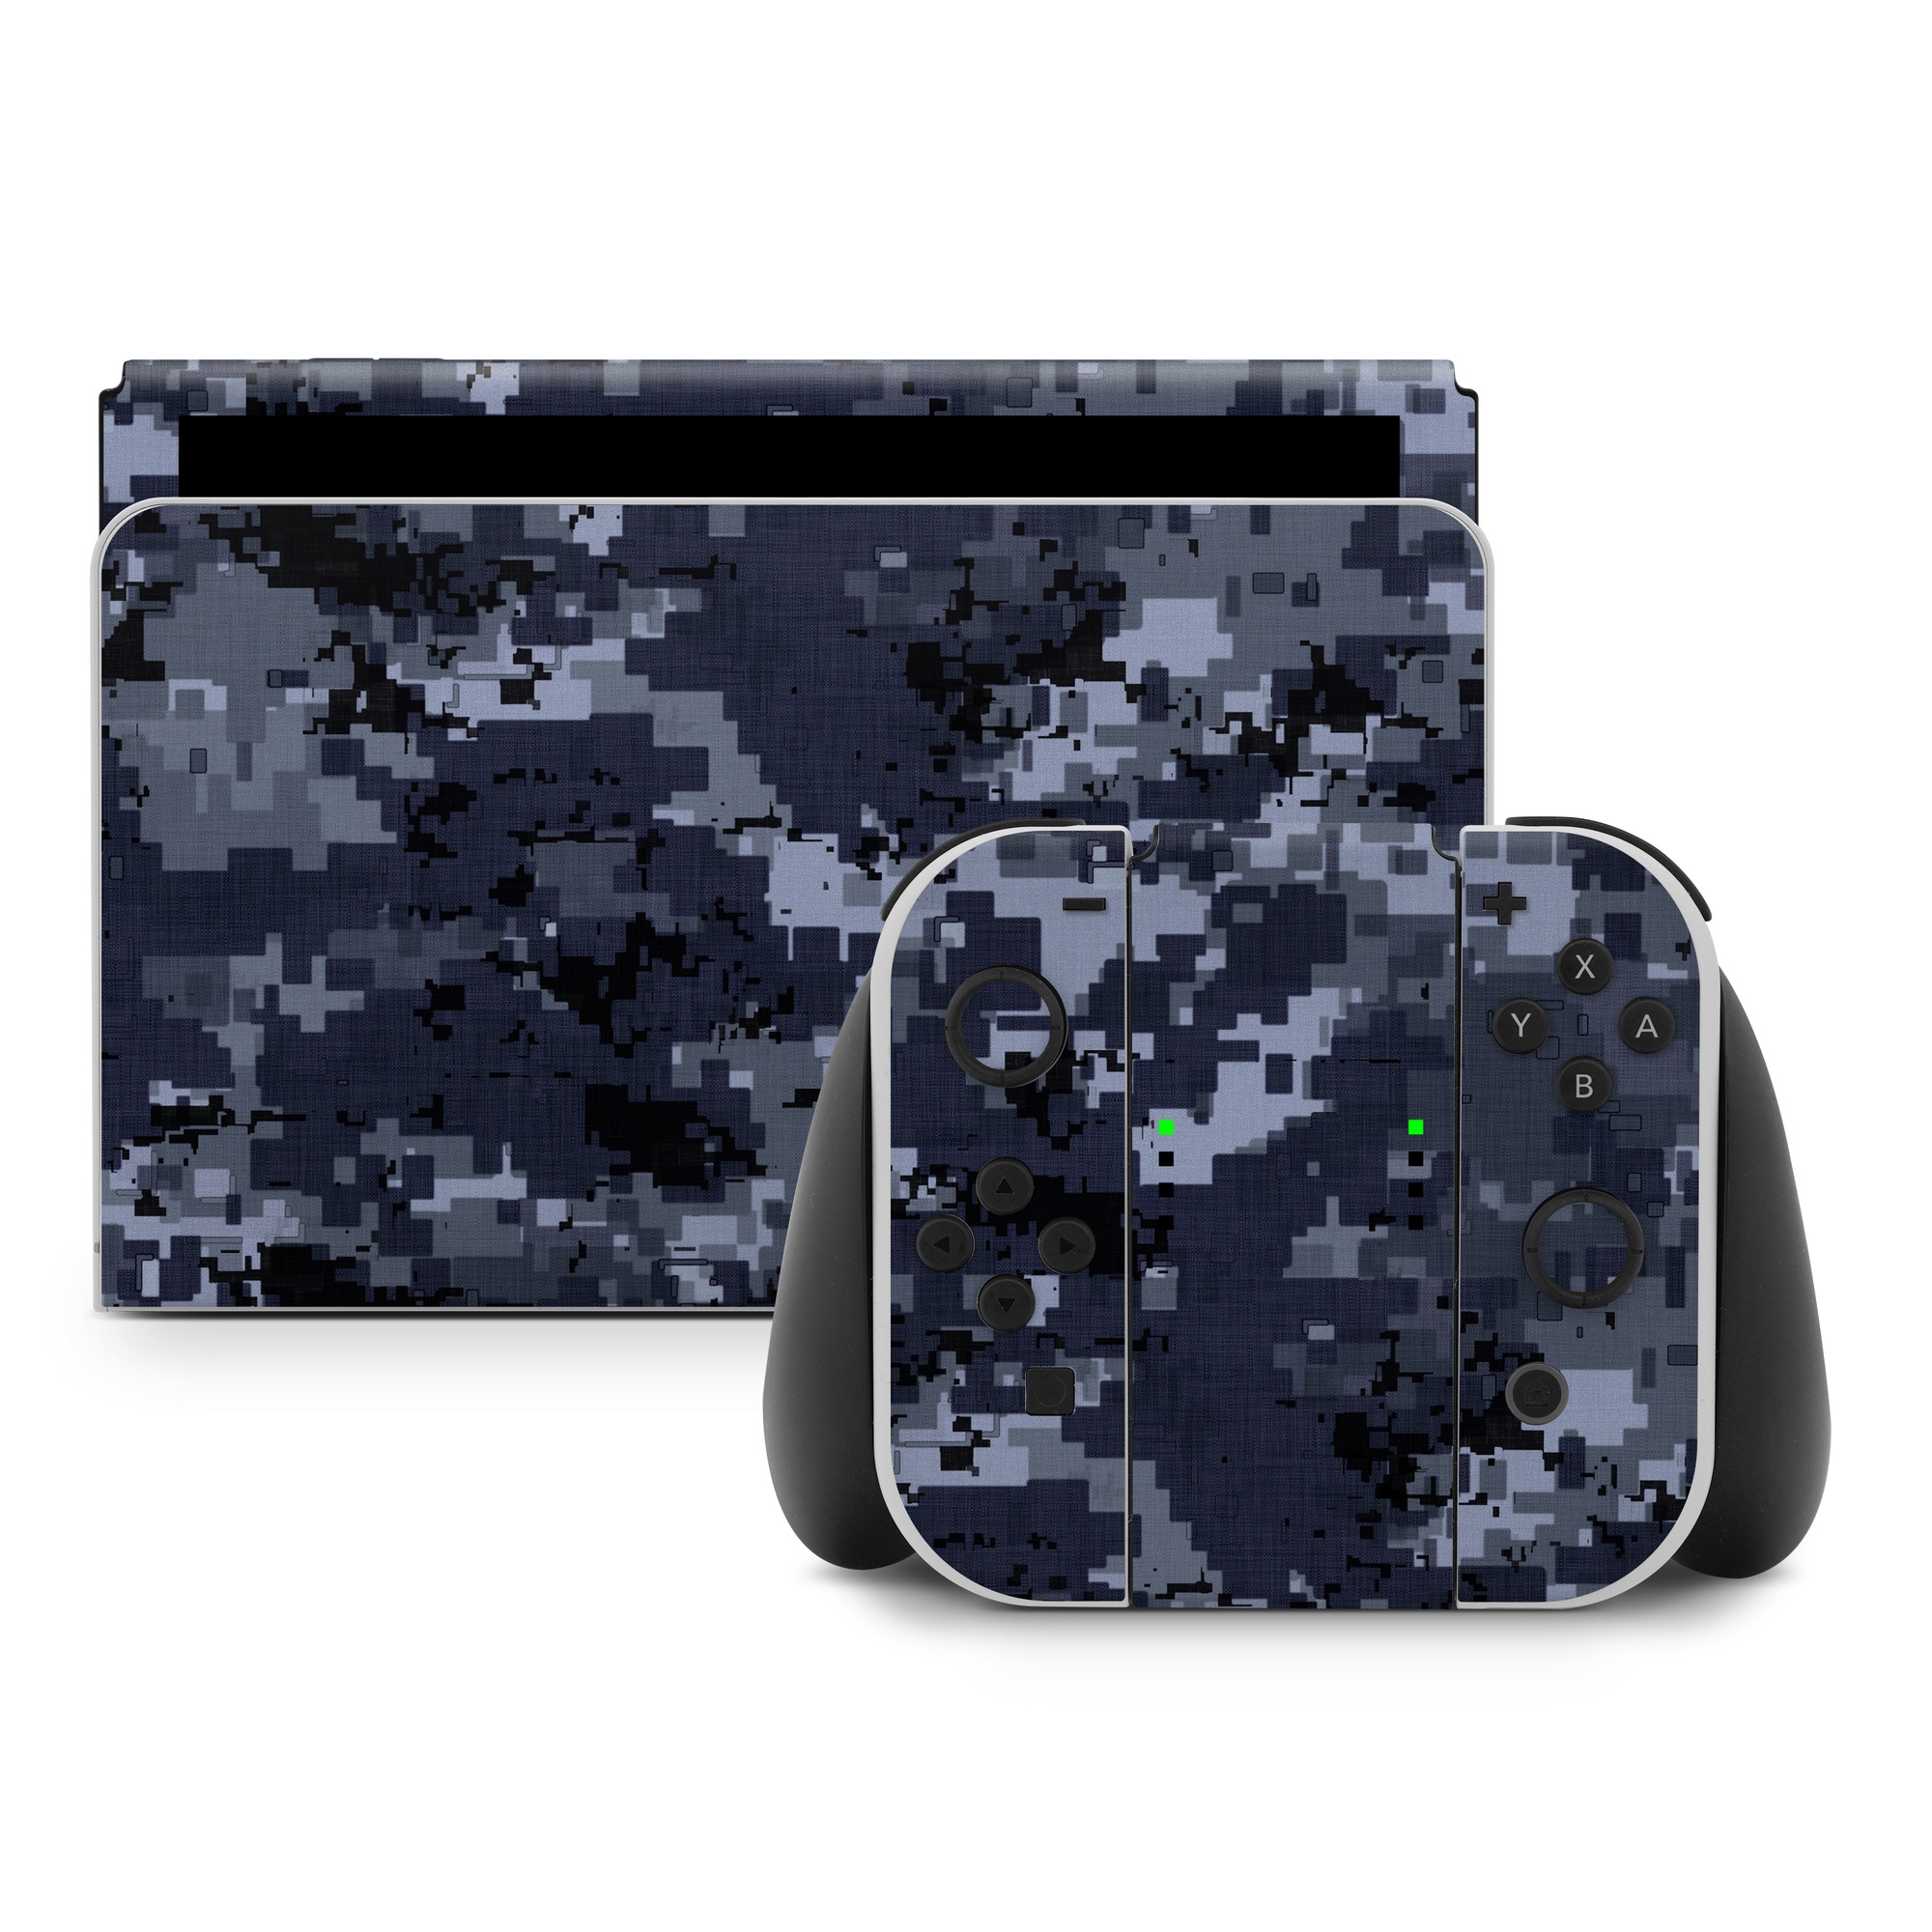 military discount nintendo switch